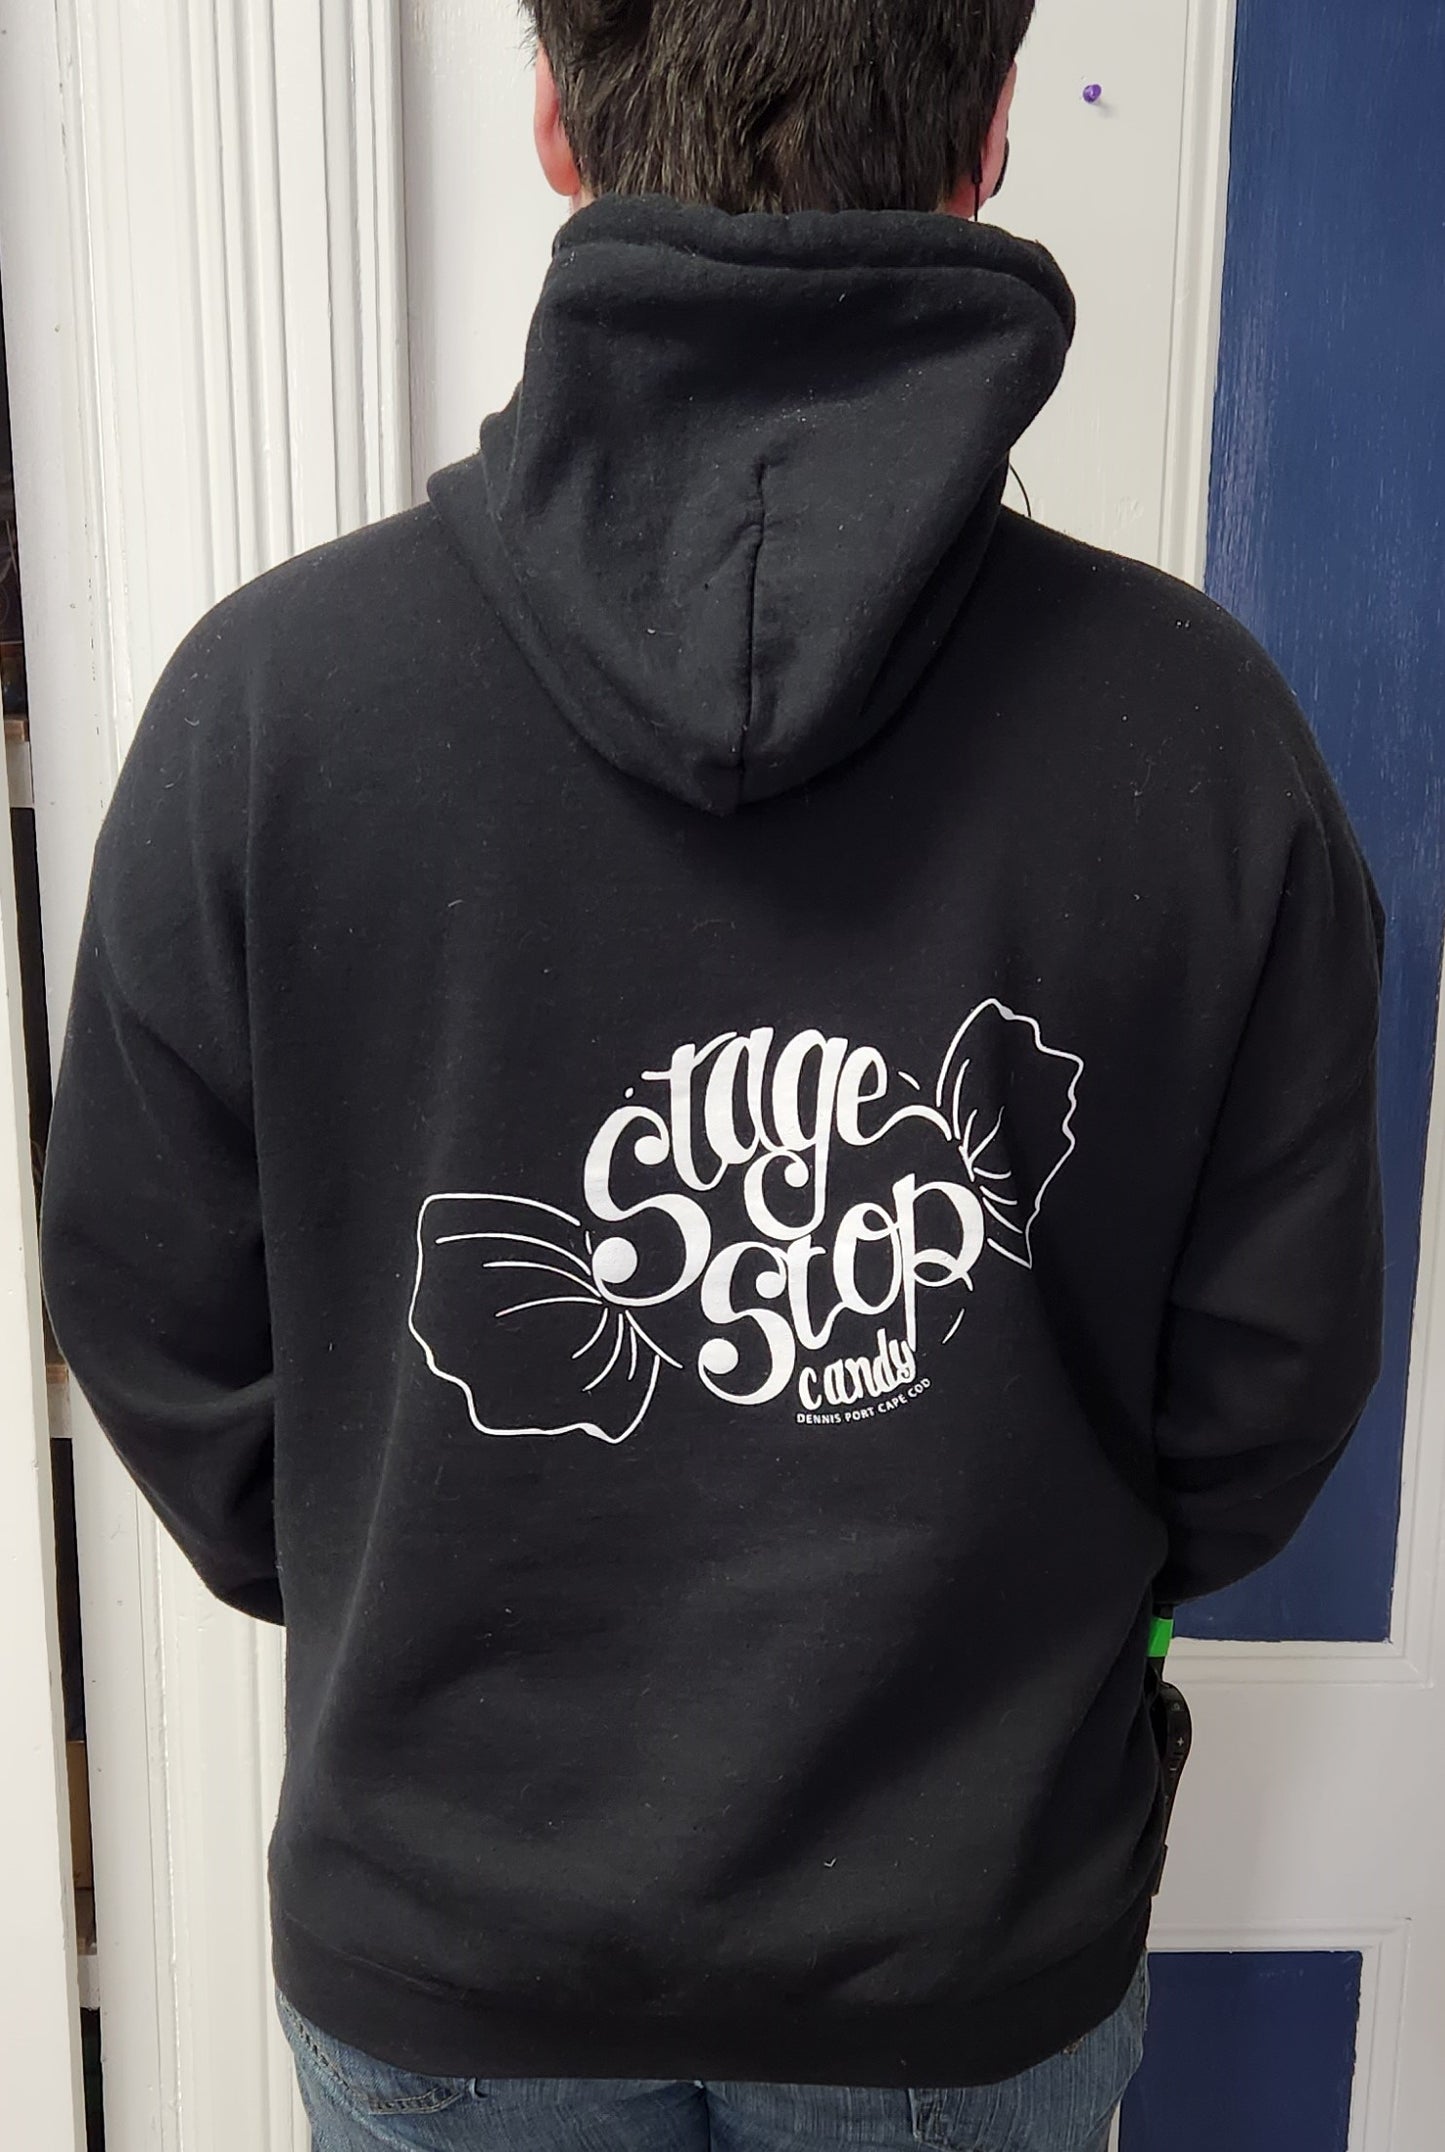 Back Design of Stage Stop Candy Hooded Sweatshirt on Male Model, designed by Sengas